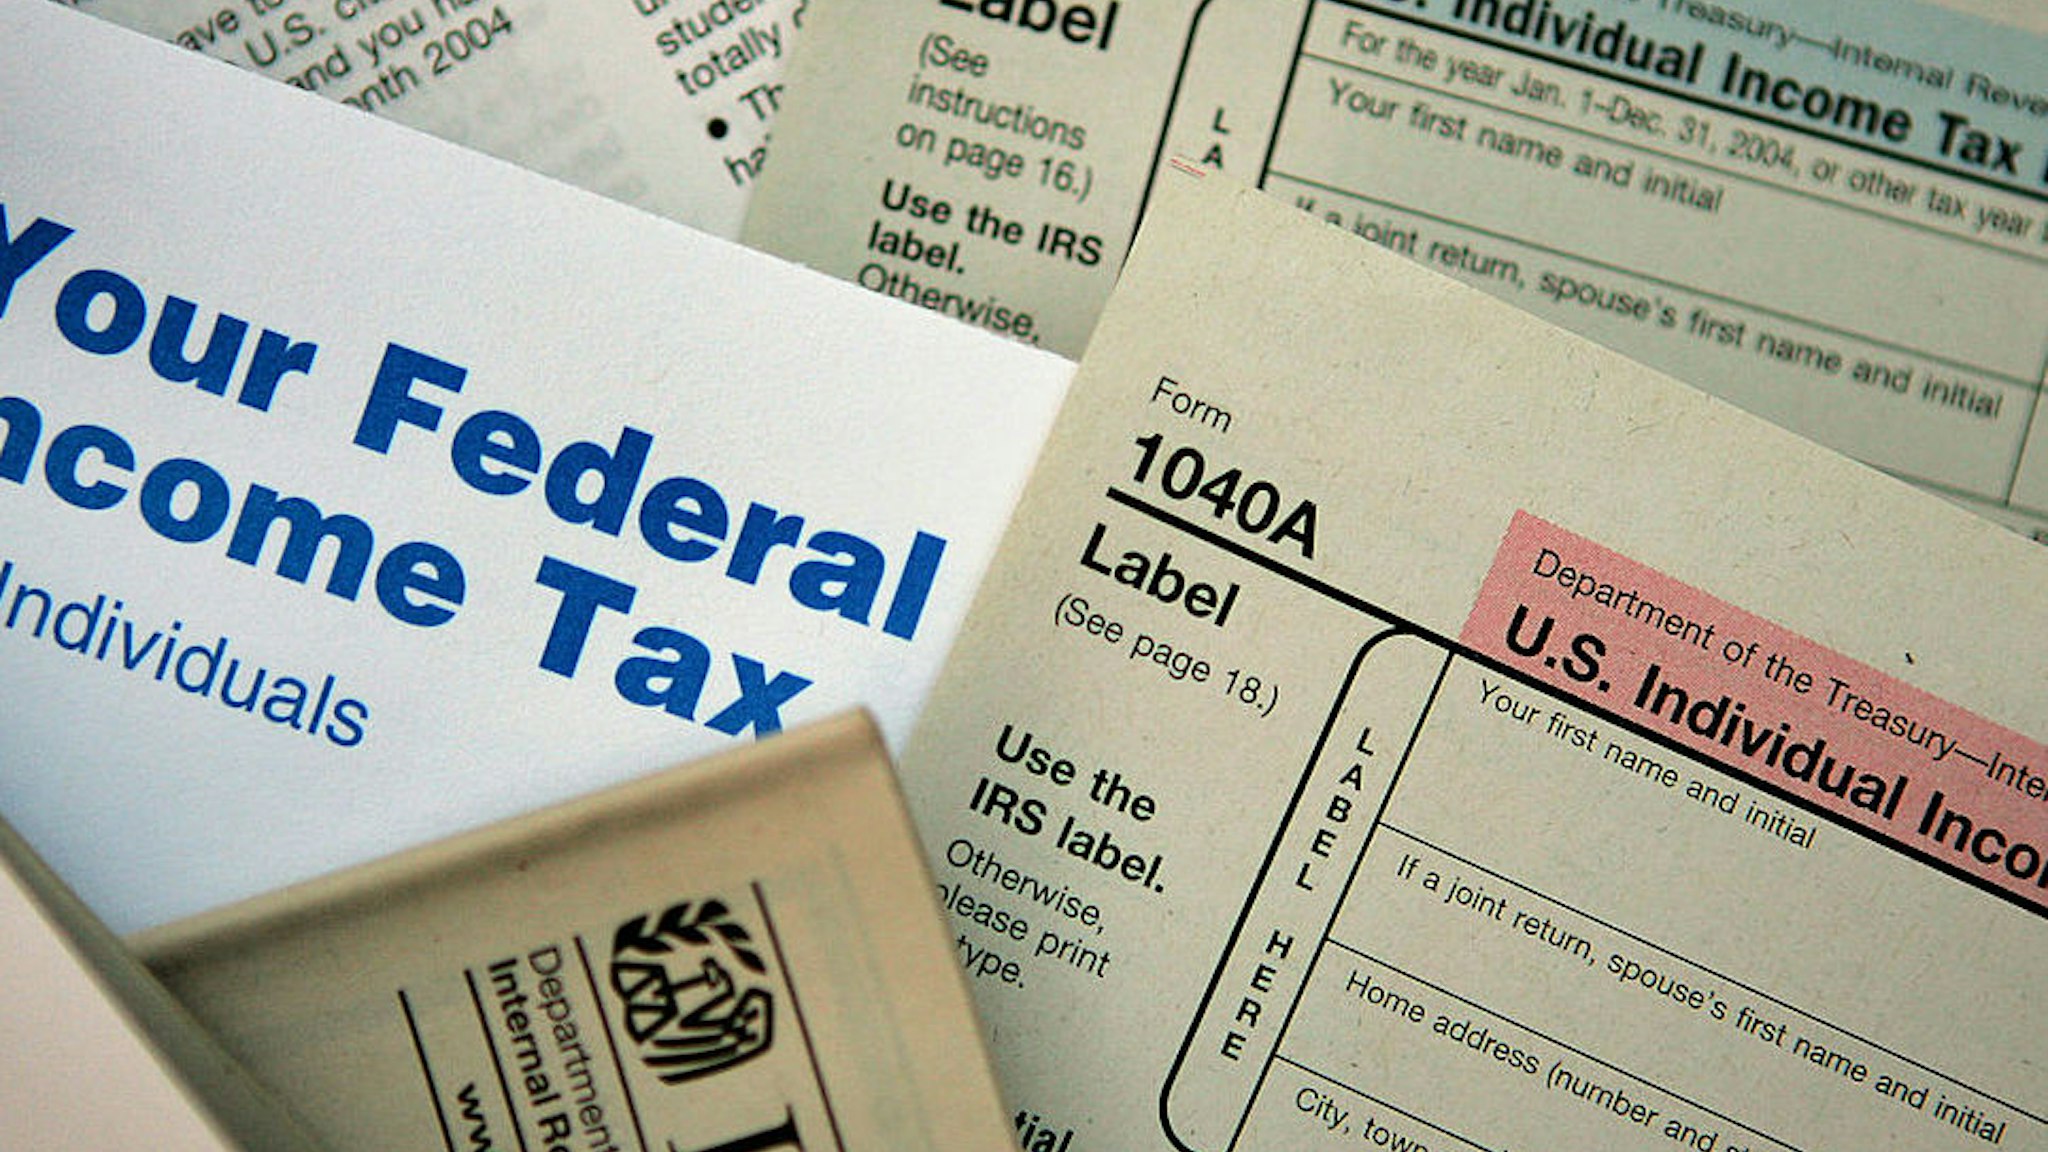 CHICAGO - NOVEMBER 1: Current federal tax forms are distributed at the offices of the Internal Revenue Service November 1, 2005 in Chicago, Illinois. A presidential panel today recommended a complete overhaul of virtually every tax law for individuals and businesses.